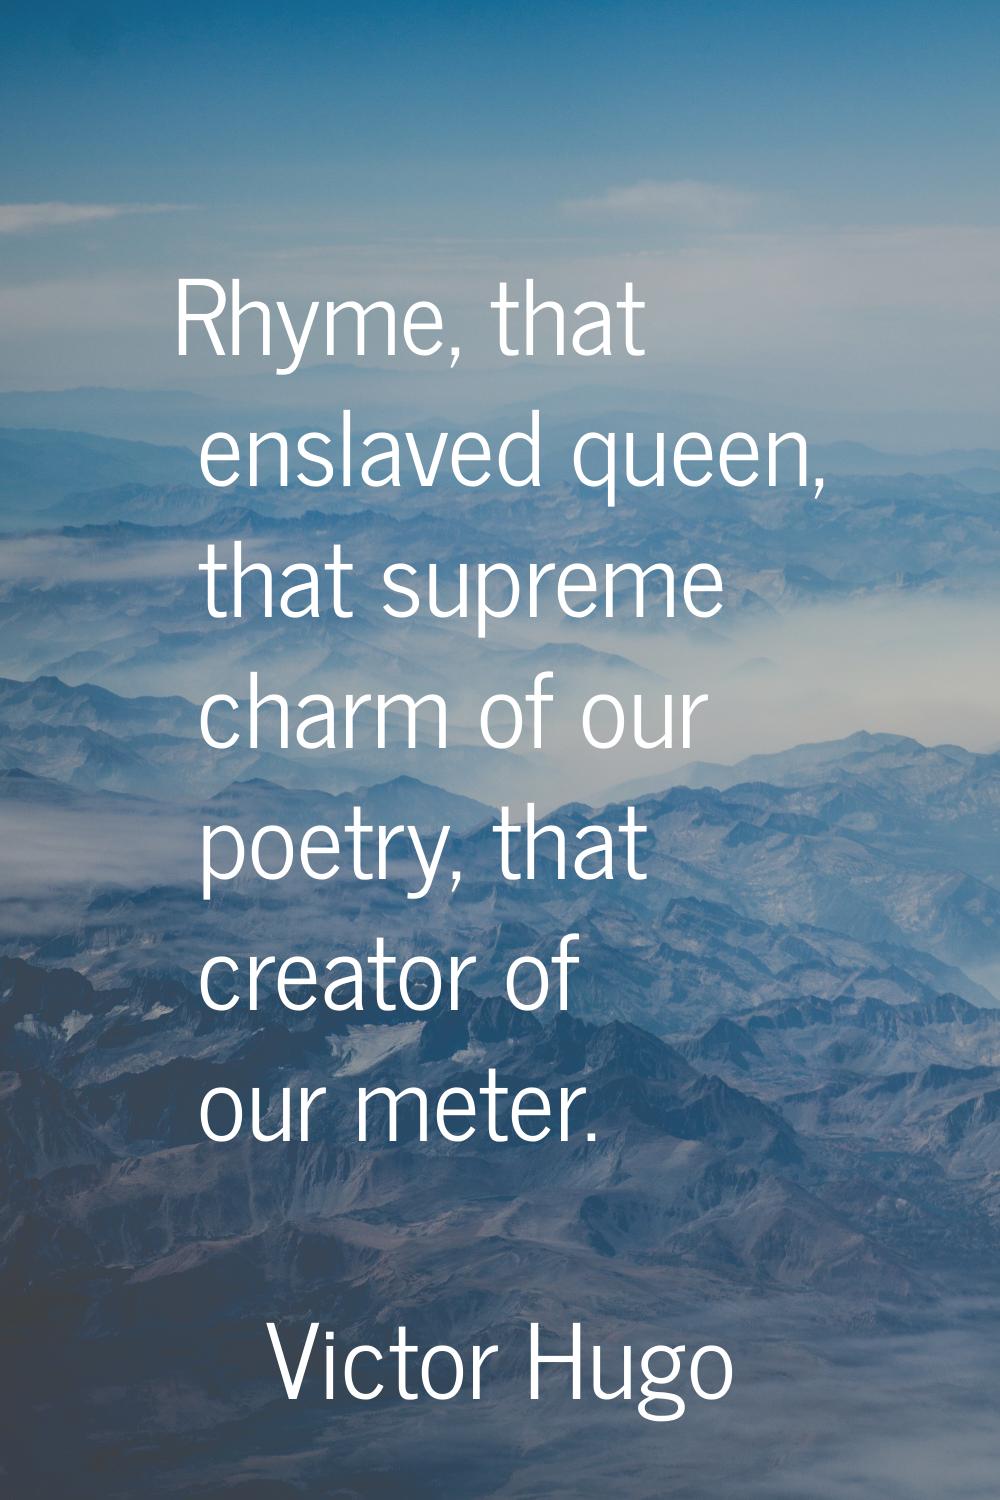 Rhyme, that enslaved queen, that supreme charm of our poetry, that creator of our meter.